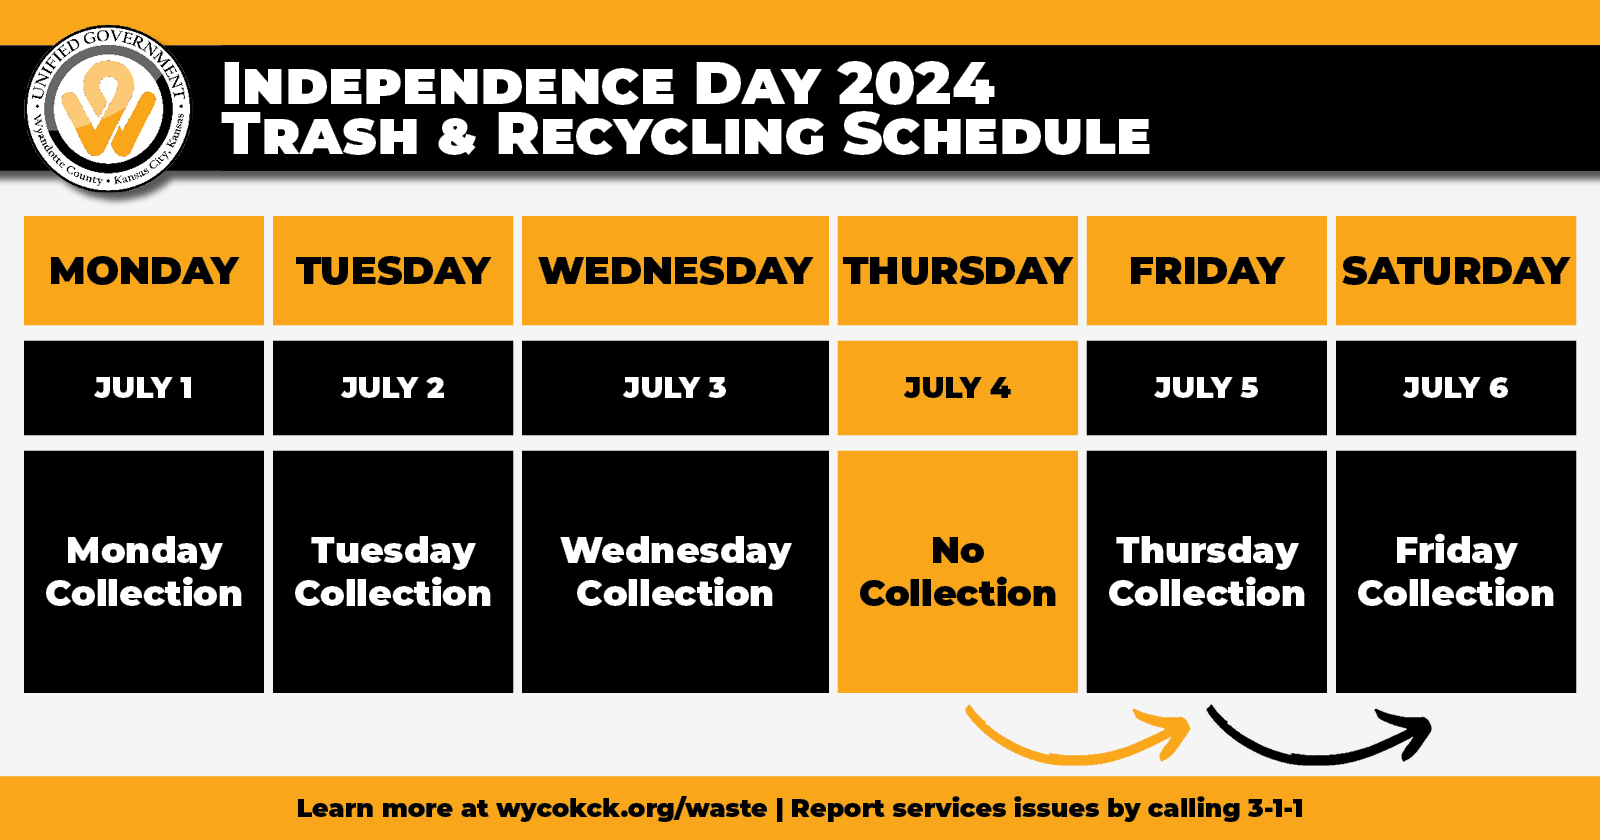 A graphic showing that residential trash and recycling will be delayed by one day in observance of Independence Day 2024